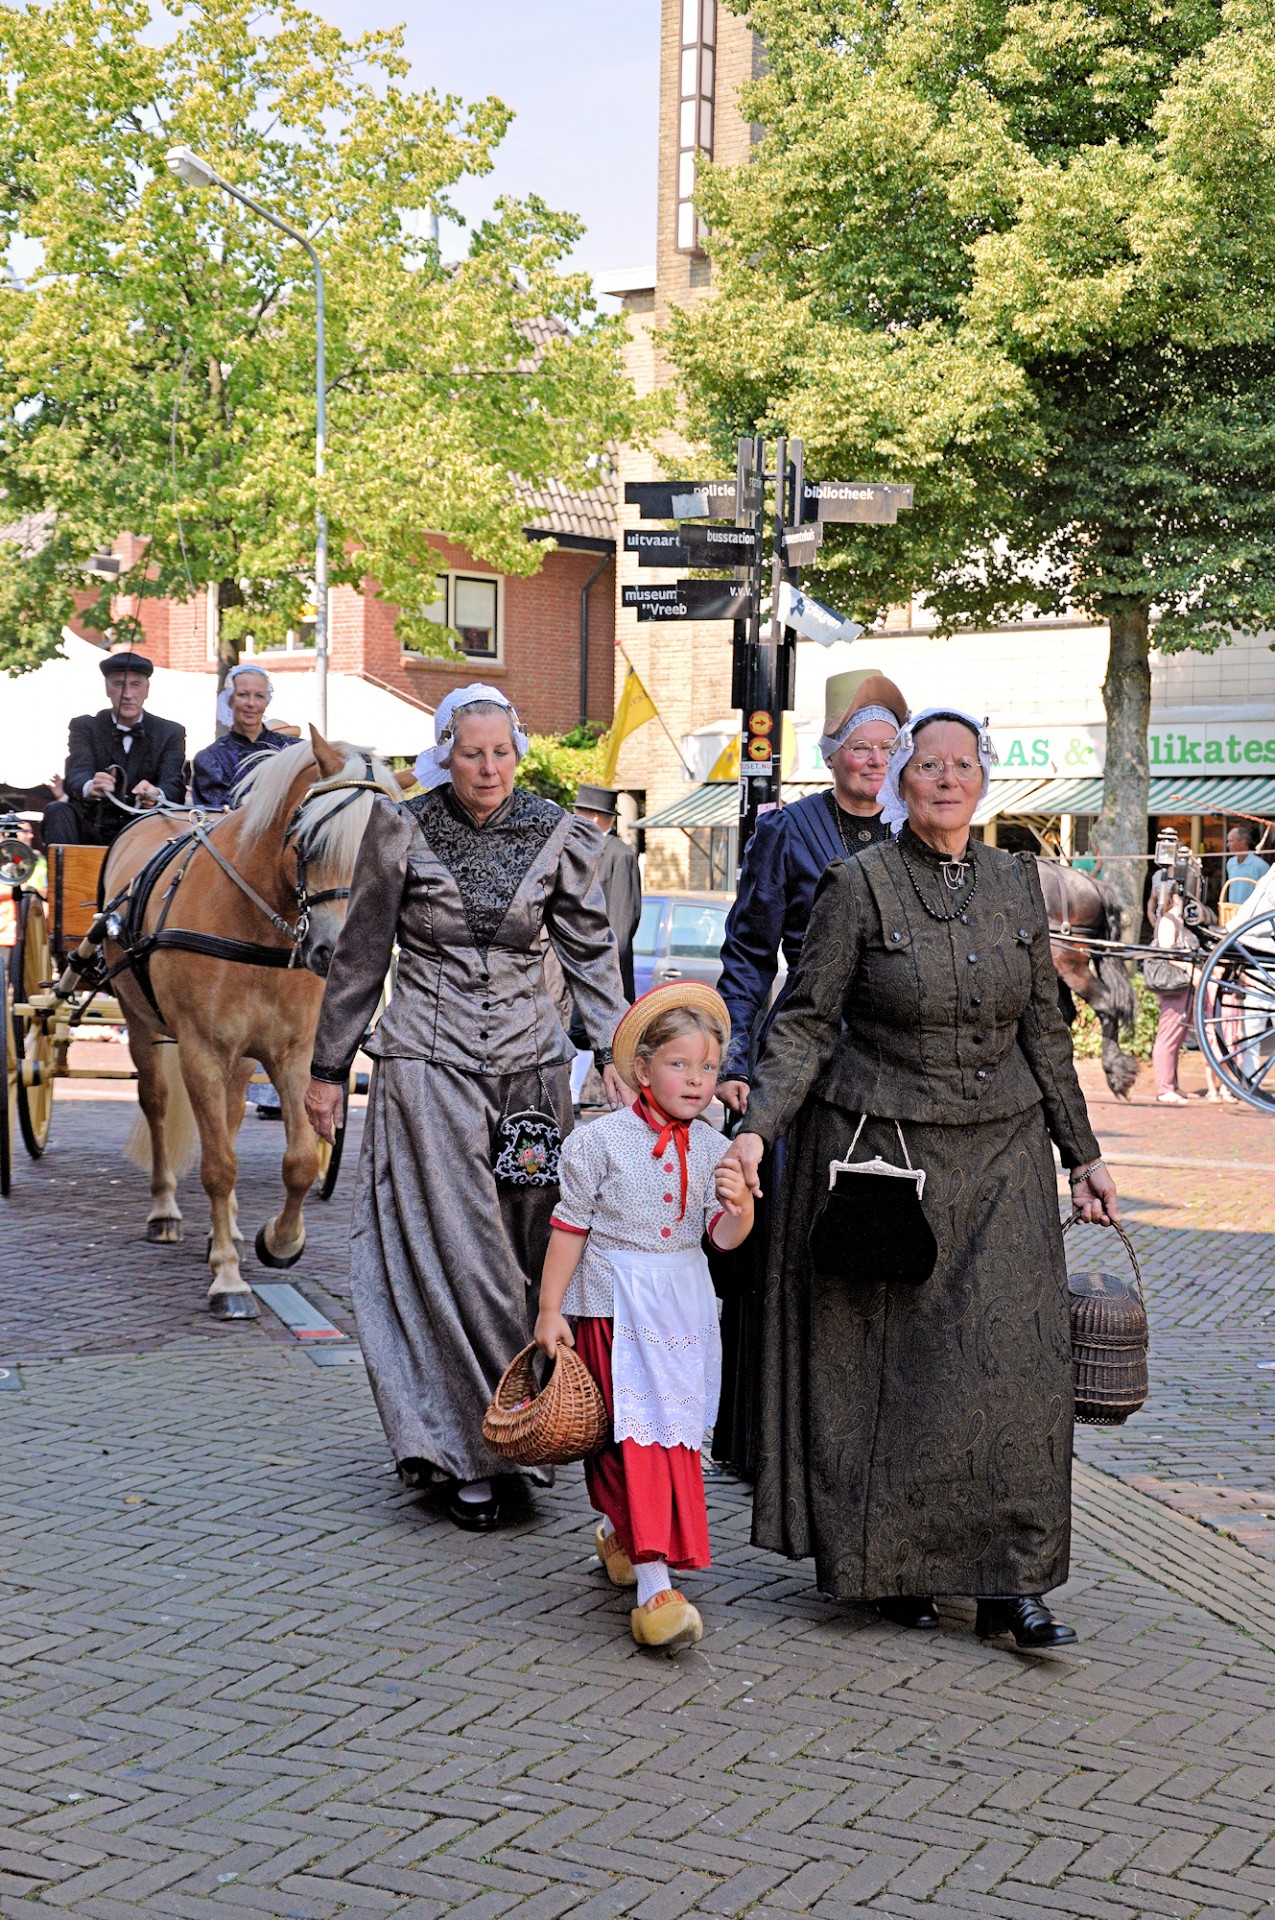 Tradition,holland,clothing,costume,dressing - free image from needpix.com